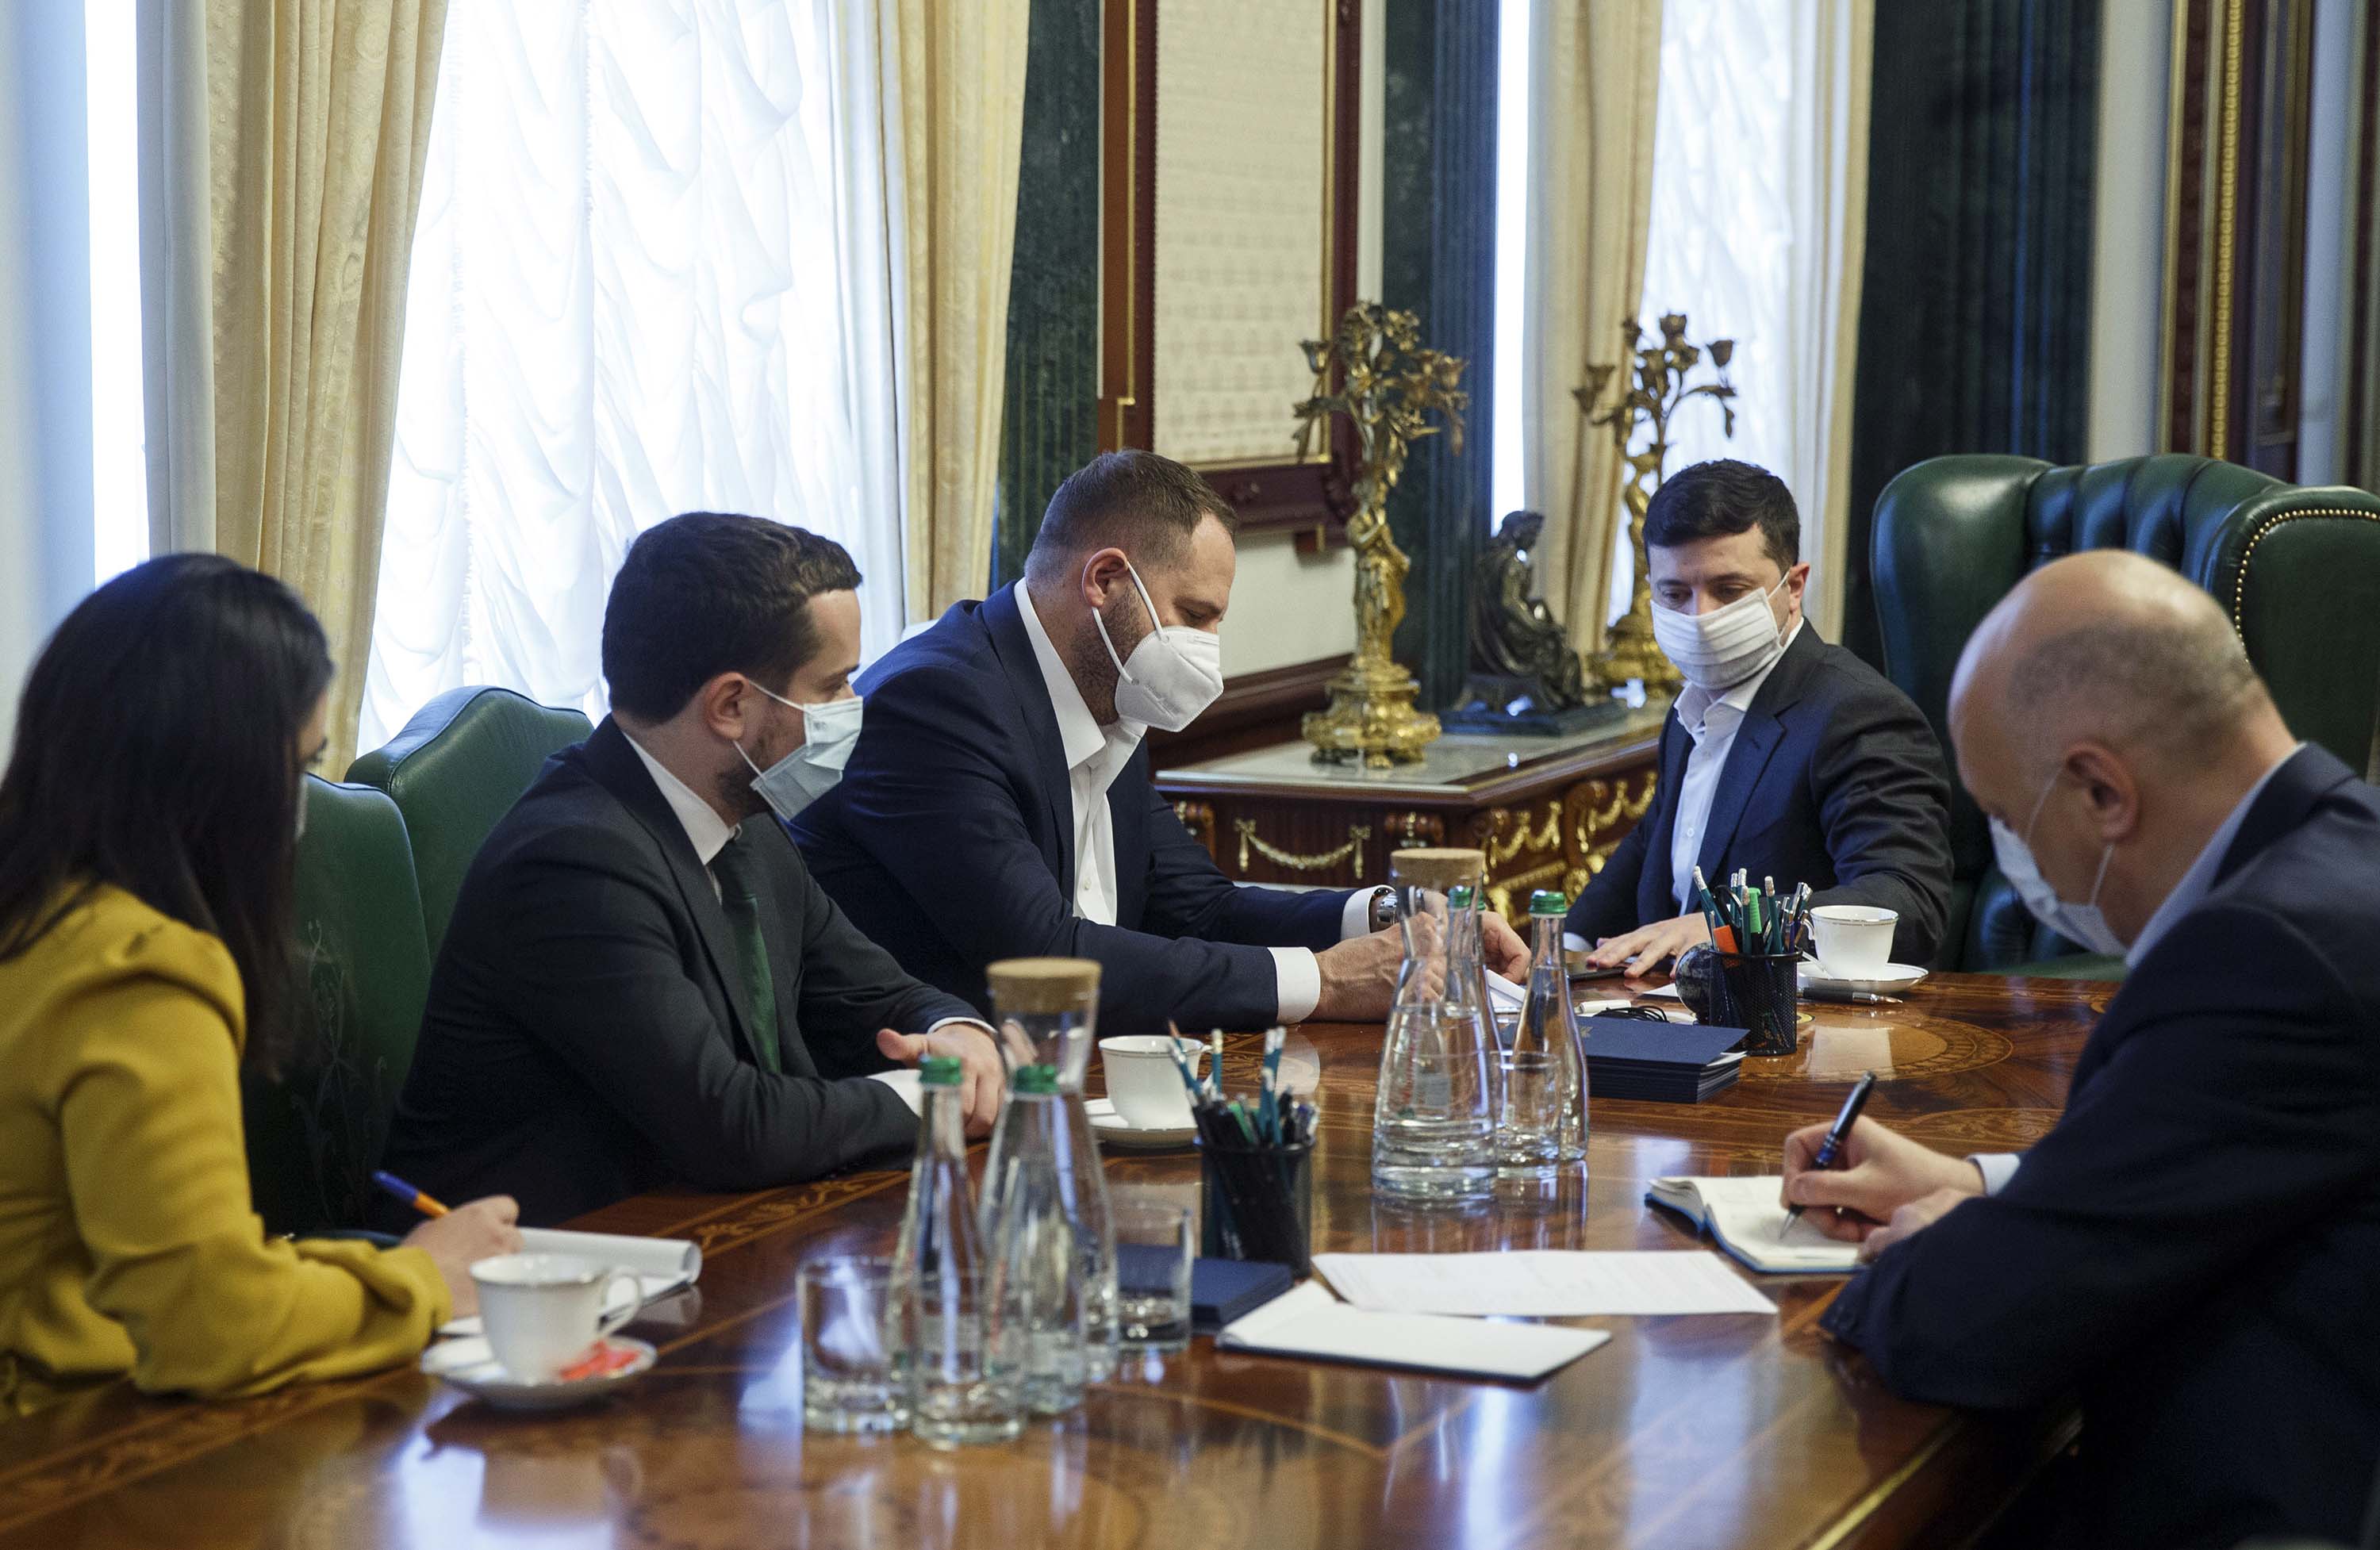 Ukrainian President Volodymyr Zelensky, second from right, is pictured during a meeting with officials at his office in Kiev, Ukraine, on April 21.